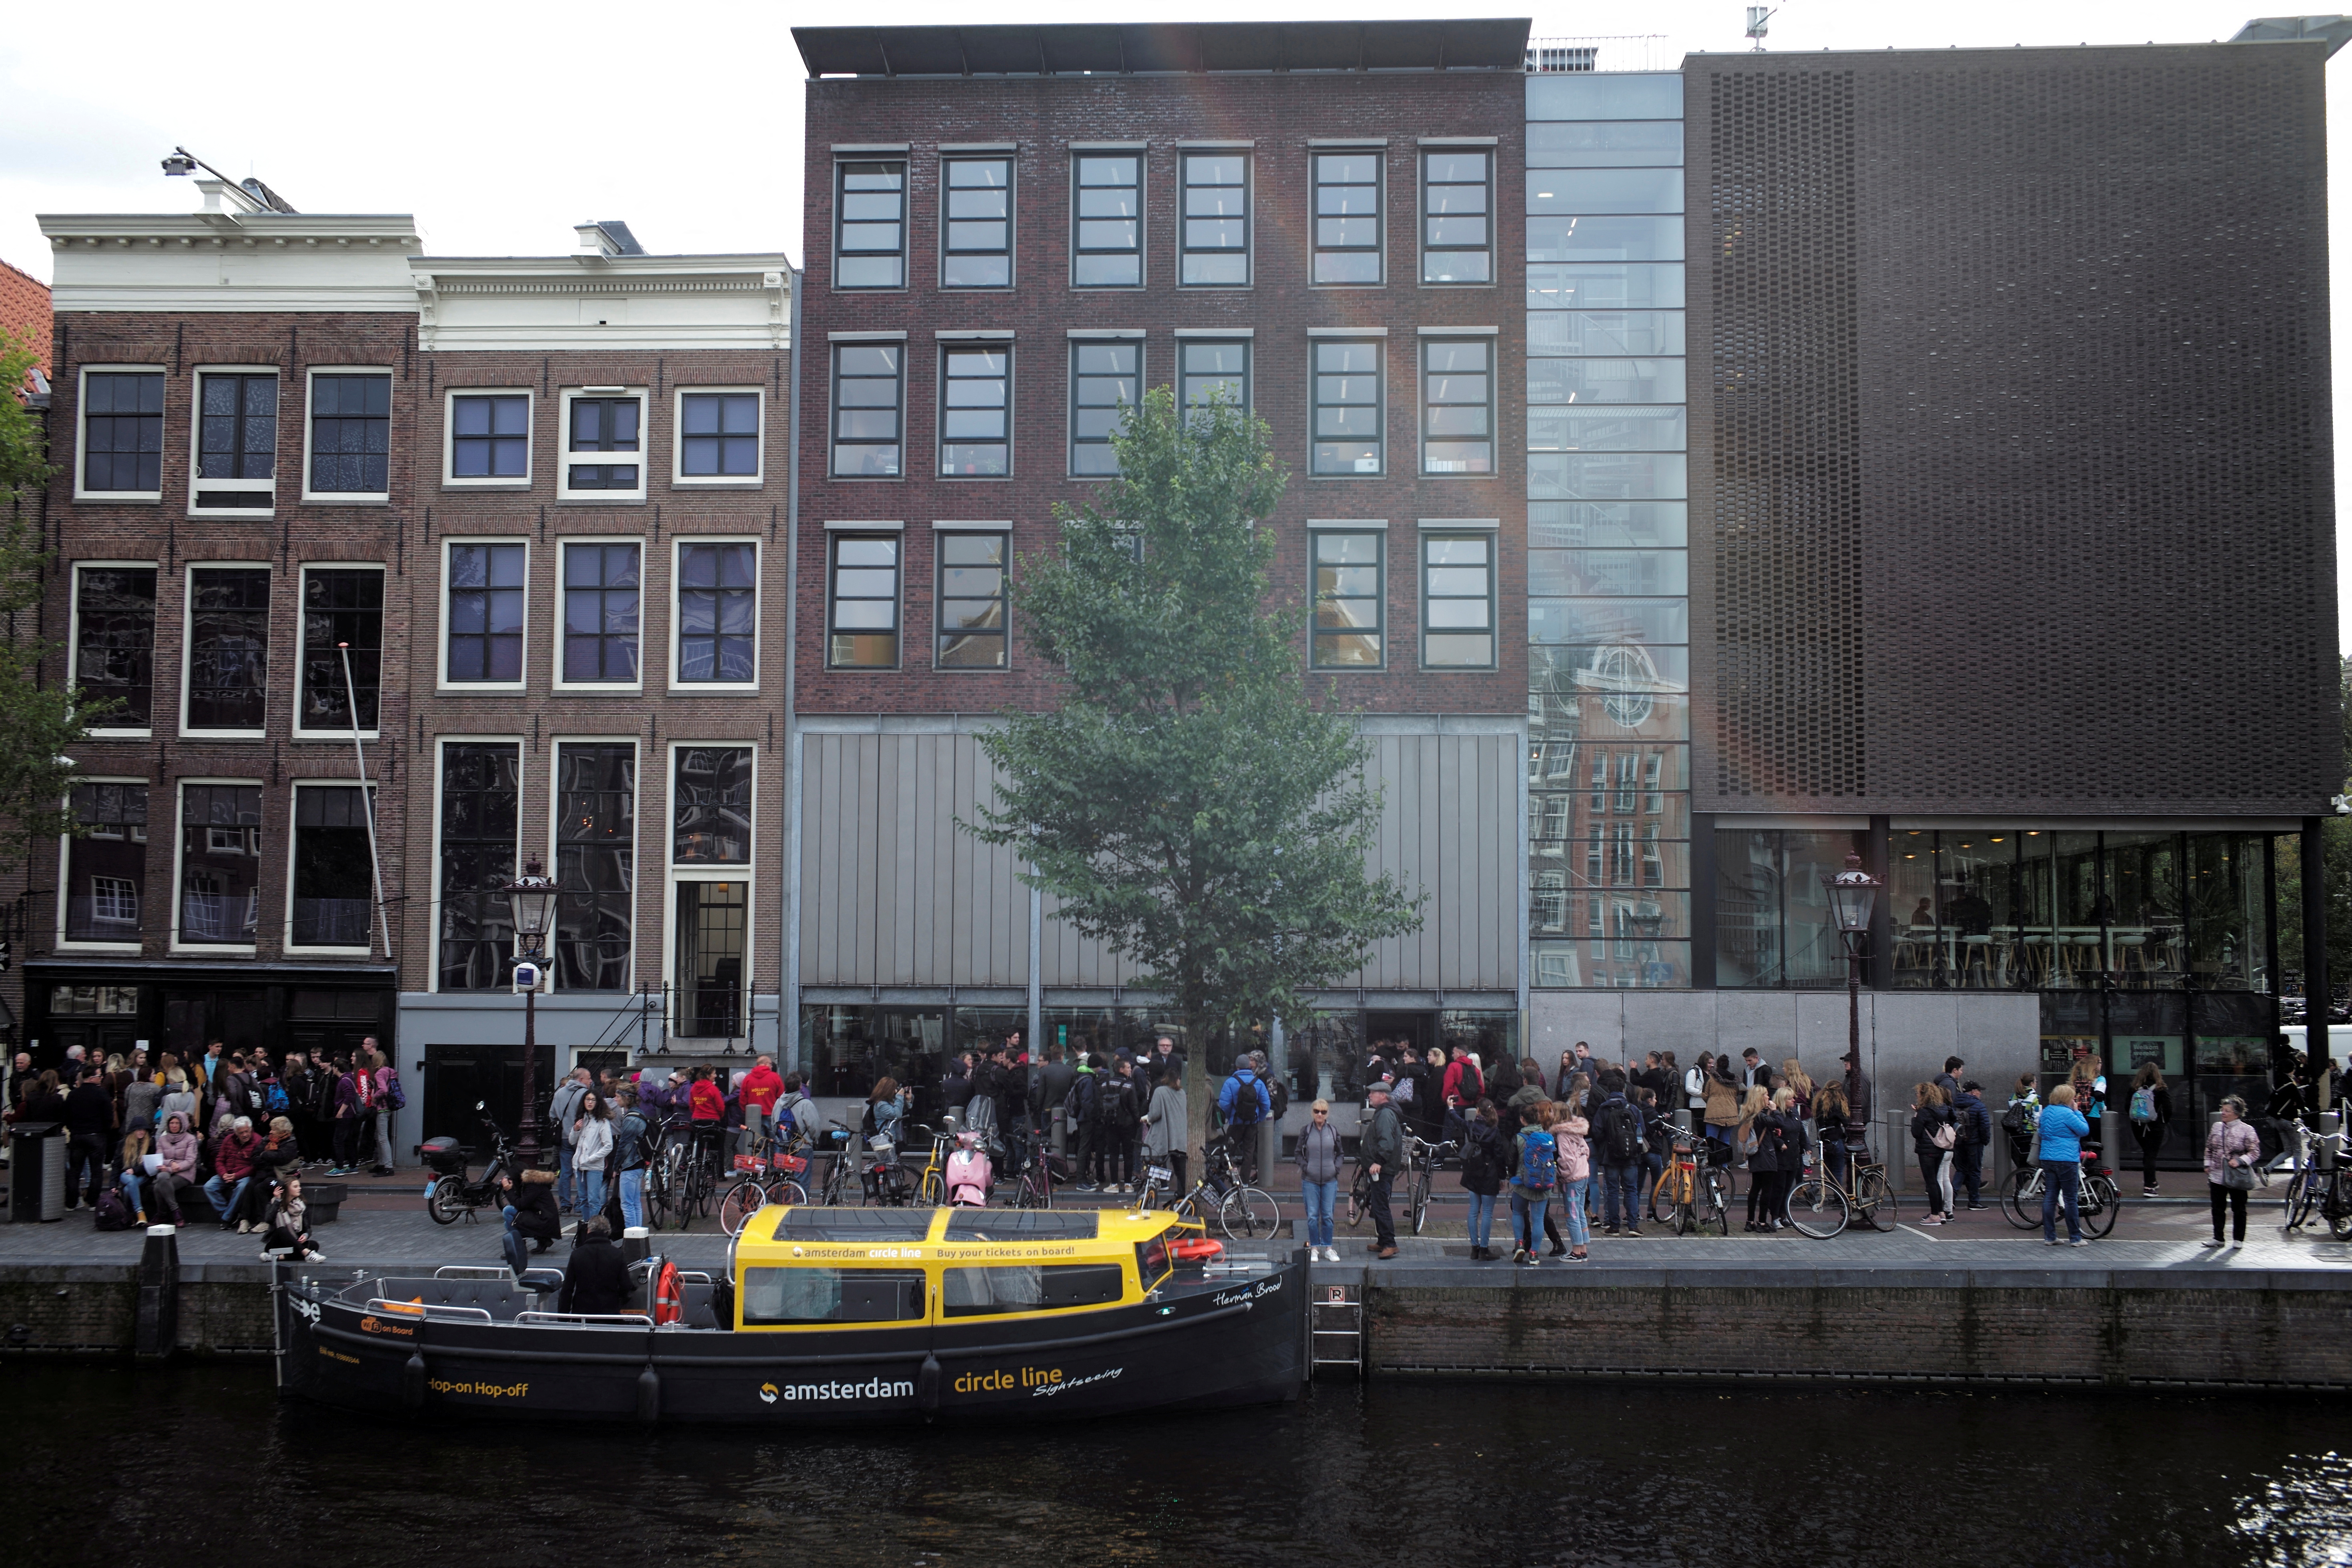 A view of Anne Frank House in Amsterdam